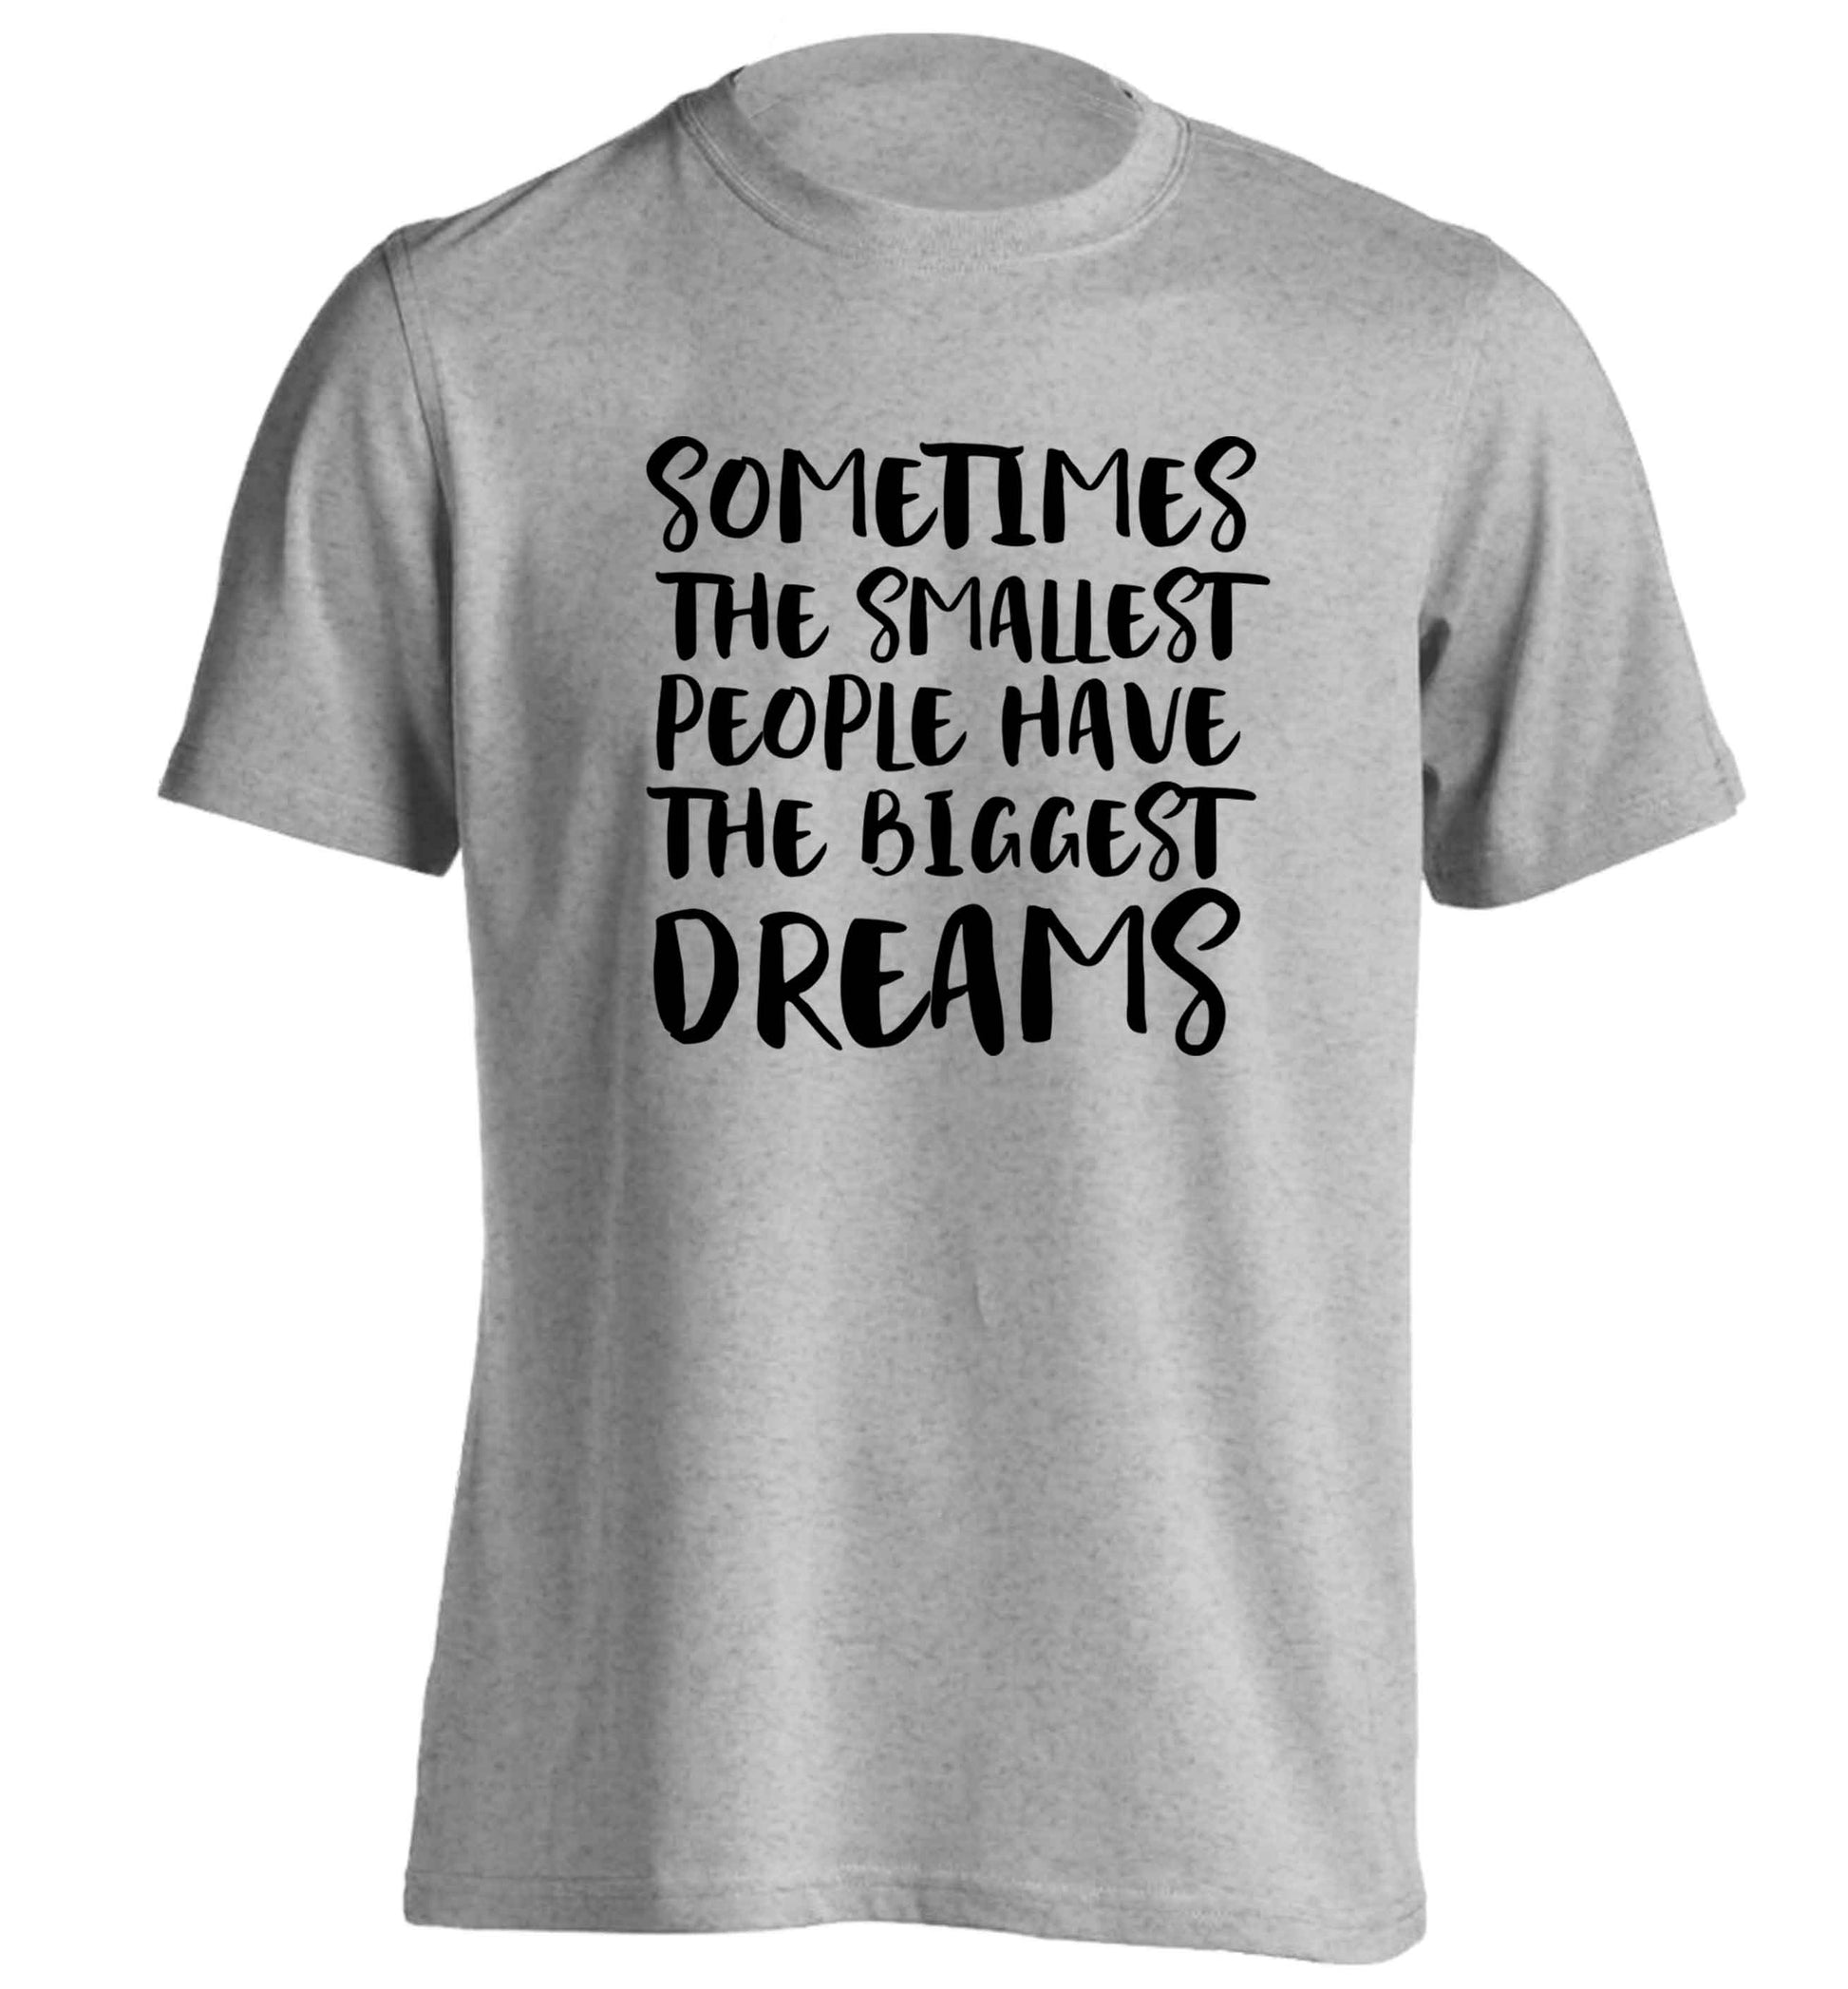 Sometimes the smallest people have the biggest dreams adults unisex grey Tshirt 2XL